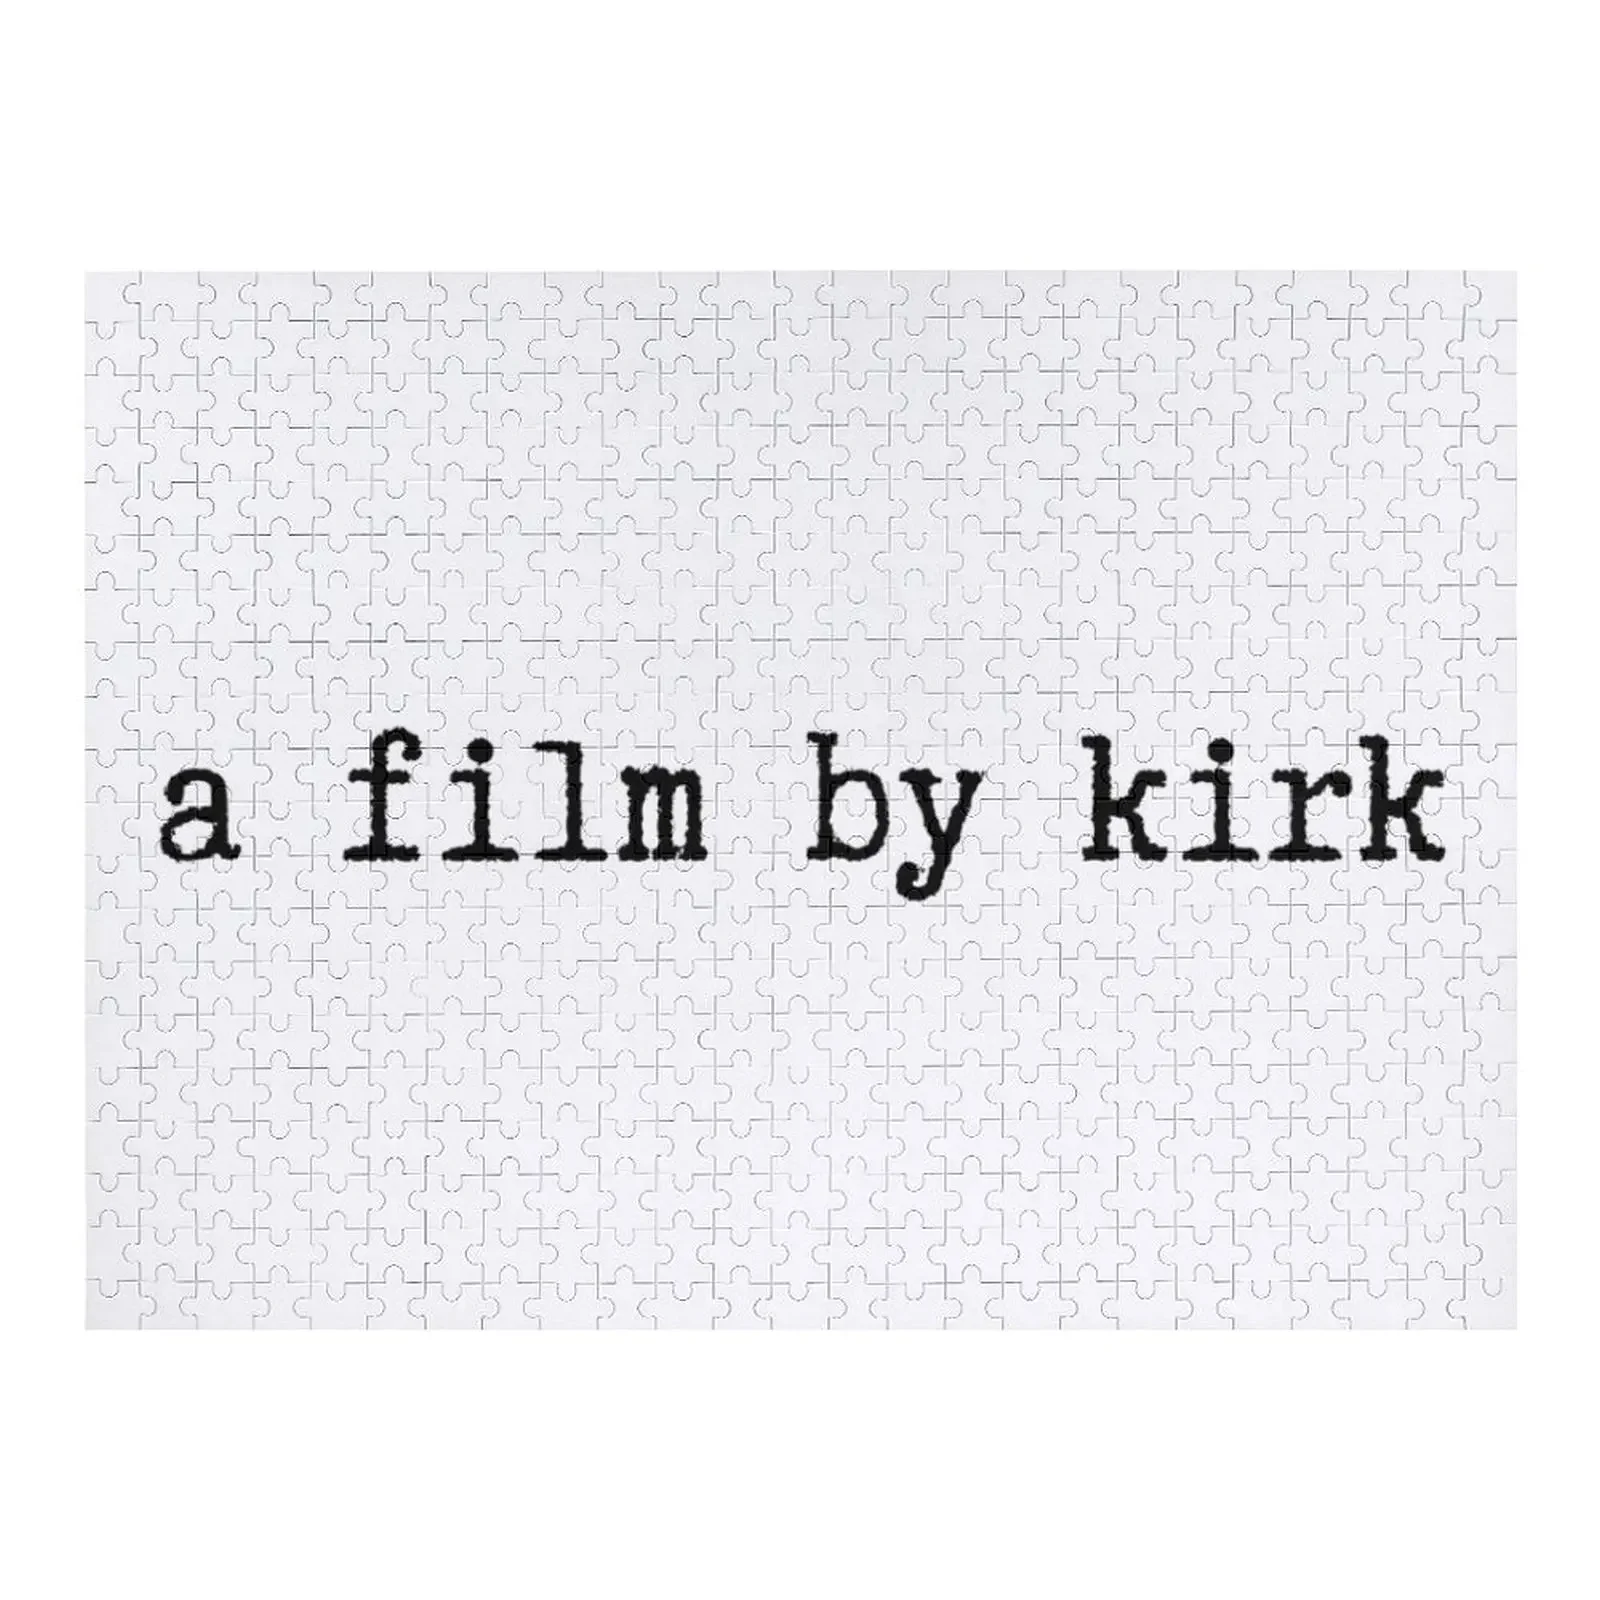 

a film by kirk Jigsaw Puzzle Wooden Jigsaws For Adults Personalised Name Customized Photo Puzzle